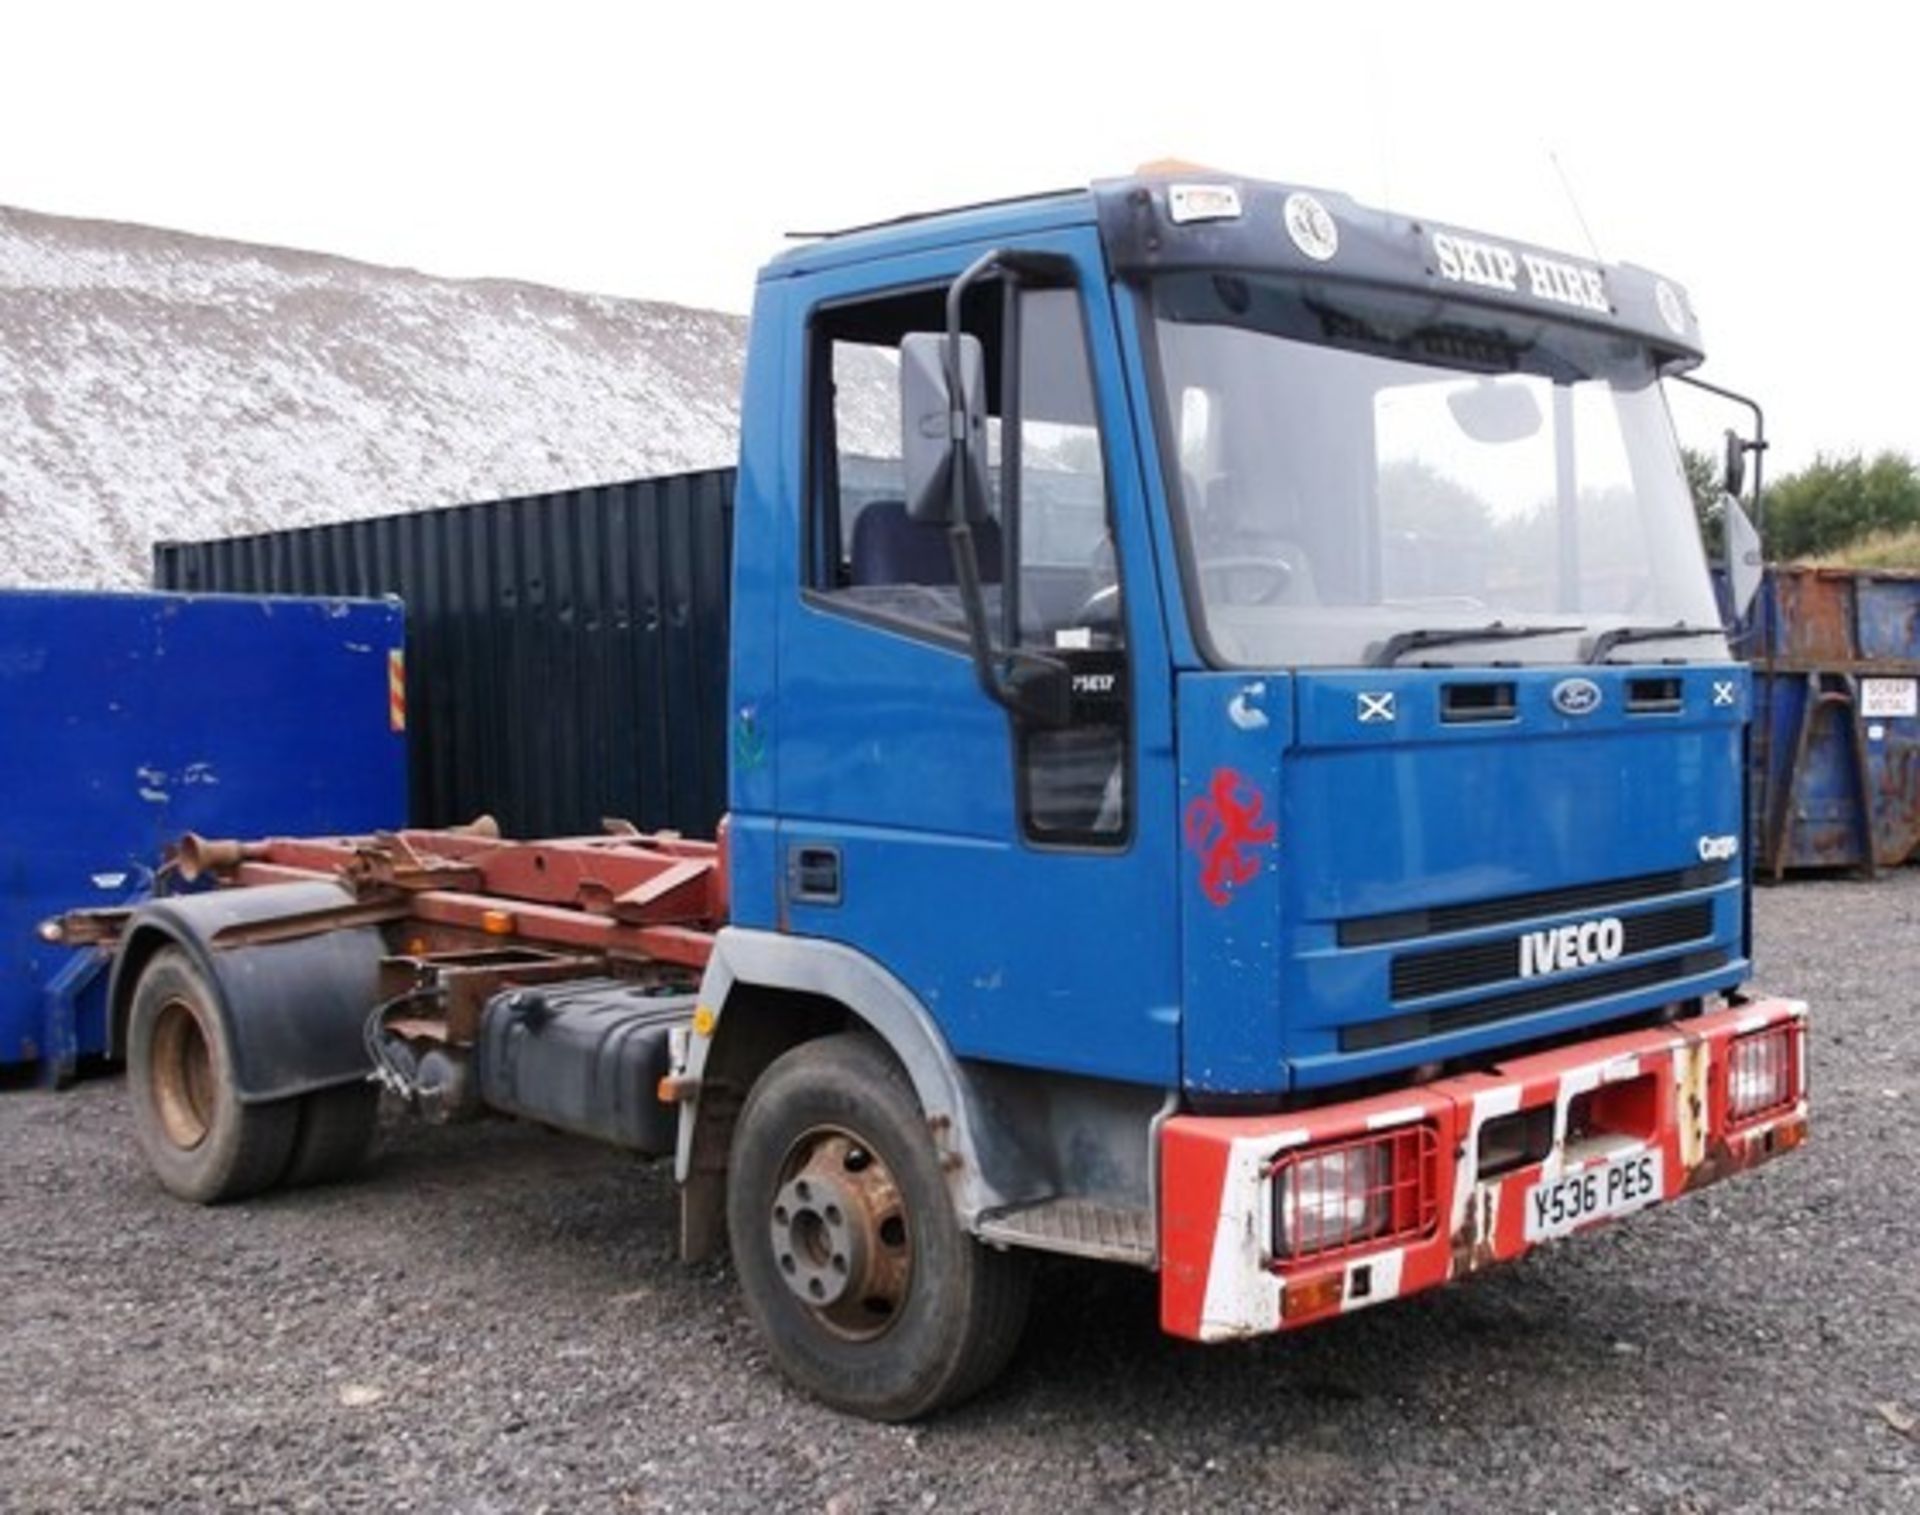 IVECO-FORD CARGO TECTOR - 3920cc
Body: 2 Dr Truck
Color: Blue
First Reg: 06/07/2001
Doors: 2
MOT: - Image 9 of 16